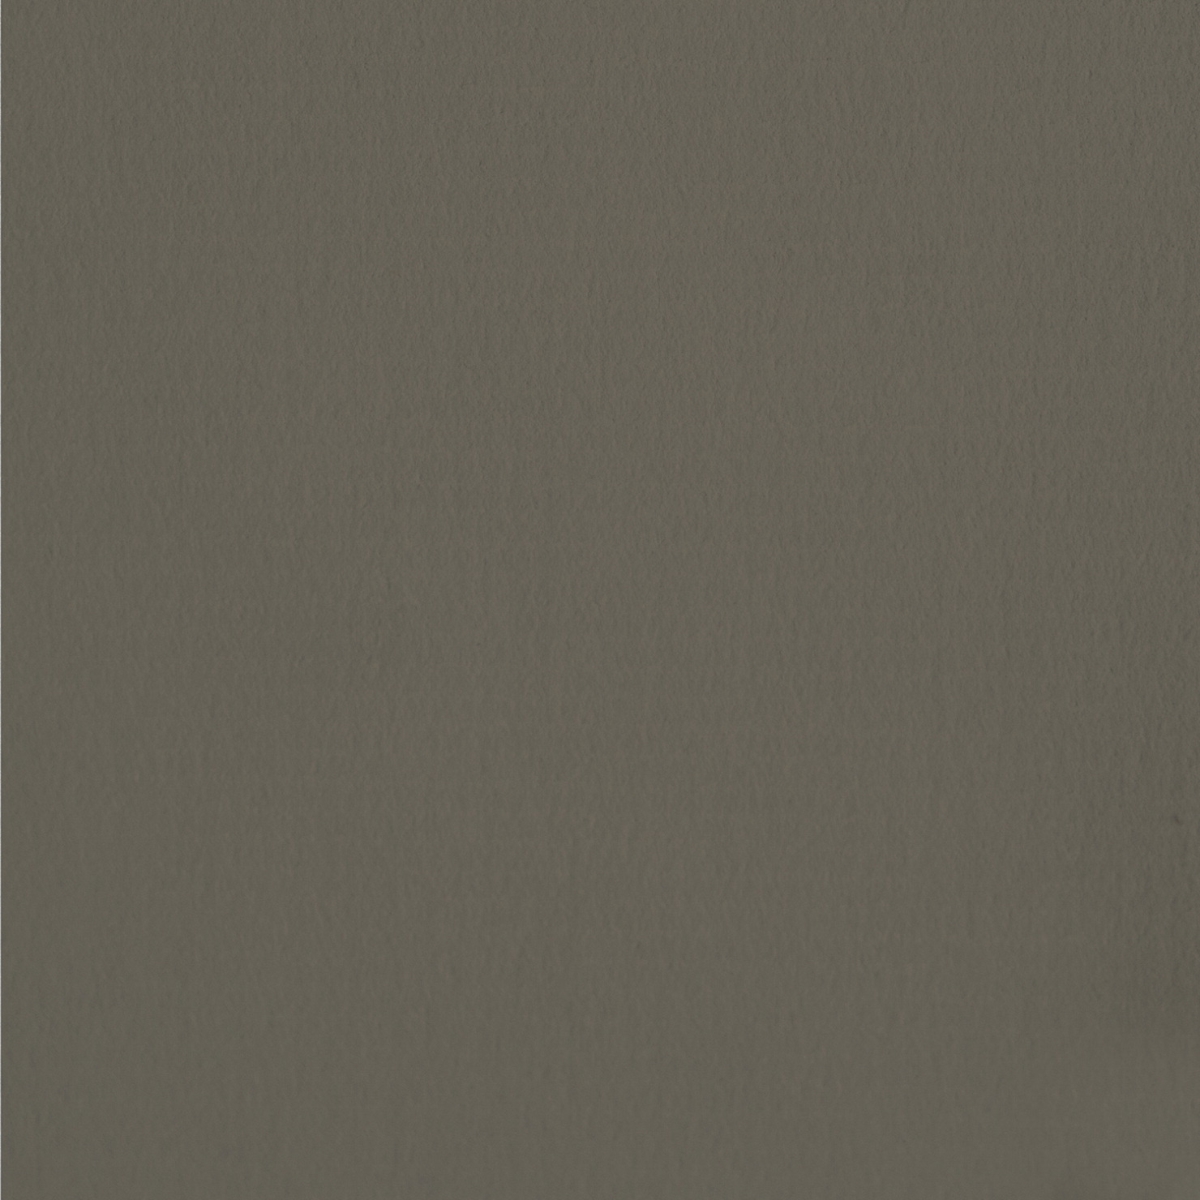 Strathmore 2021627 25 x 19 in. 500 Series Charcoal Paper with 25 Sheets, Charcoal Gray - 64 lbs